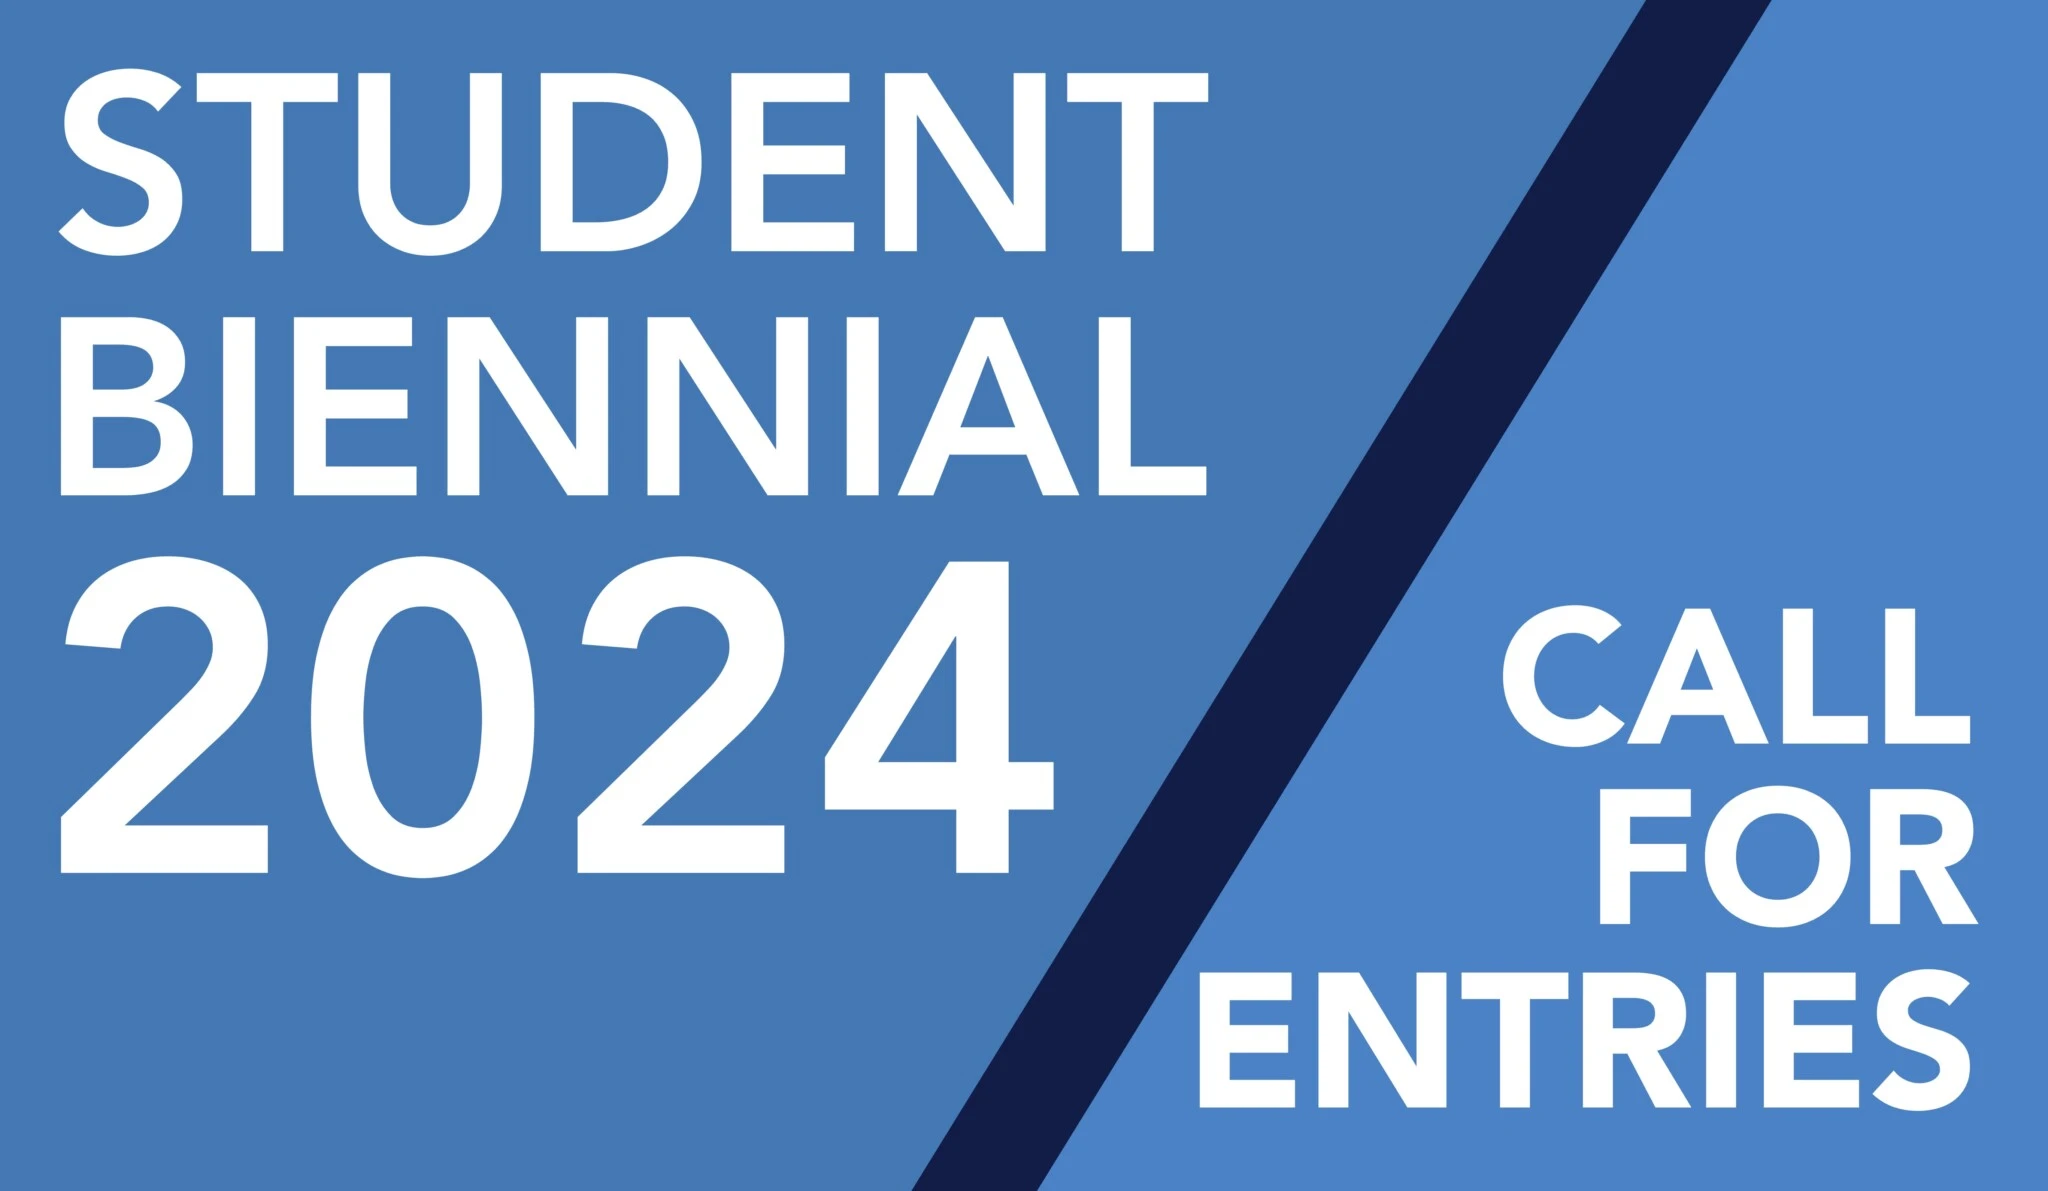 an advertisement image for the student biennial with white text on a blue background